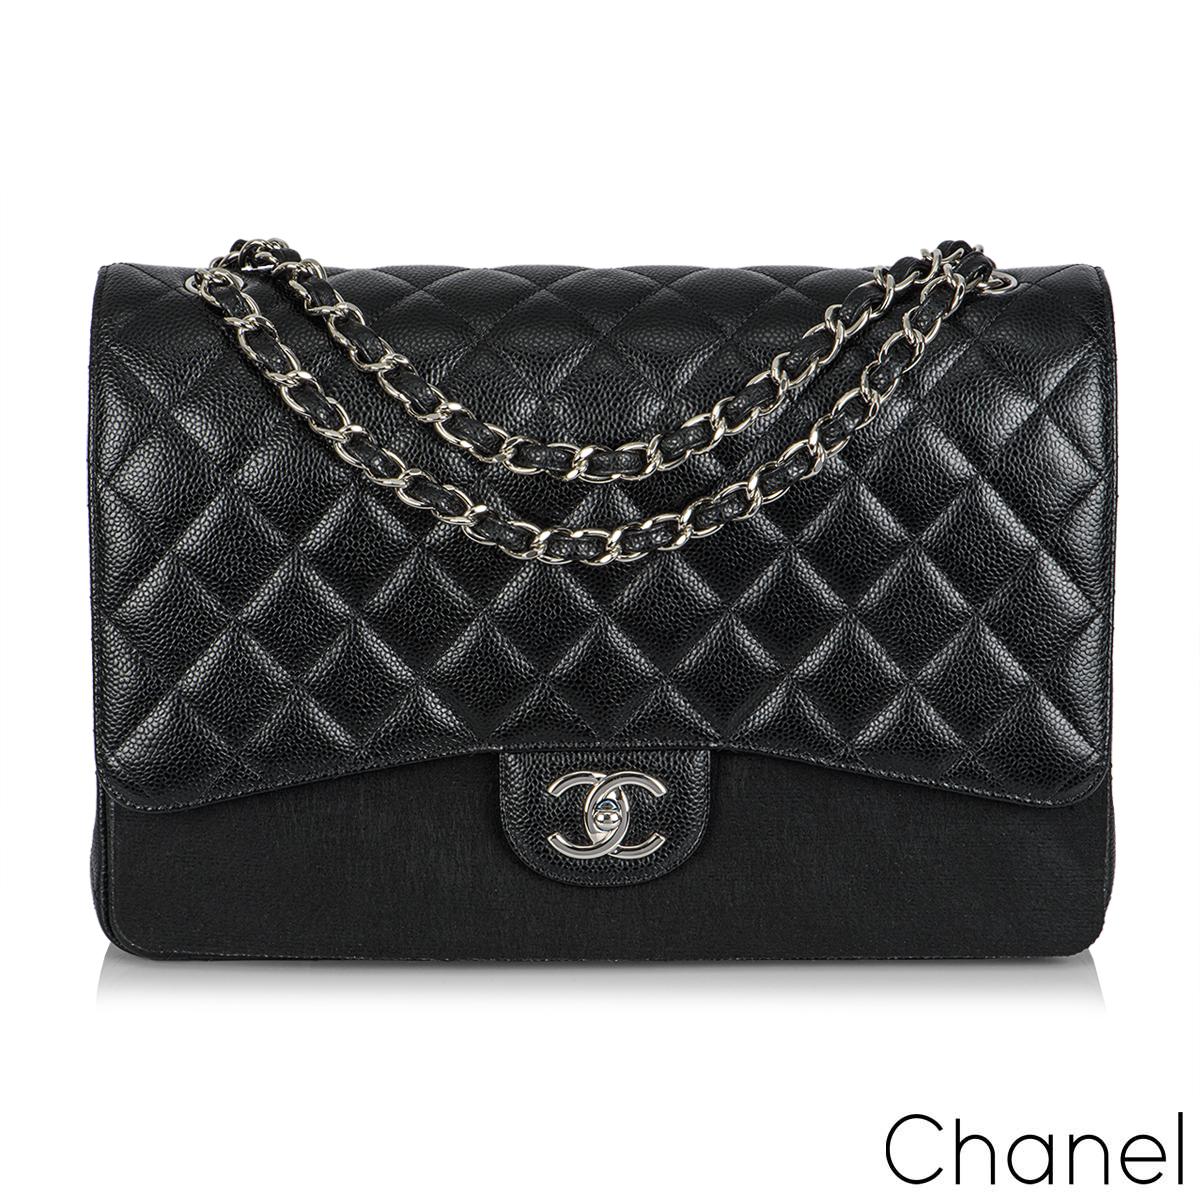 A timeless Chanel Classic Double Flap Handbag. The exterior of this Maxi classic is in black caviar leather with silver tone hardware. It features a front flap with signature CC turnlock closure, half moon back pocket, an adjustable interwoven